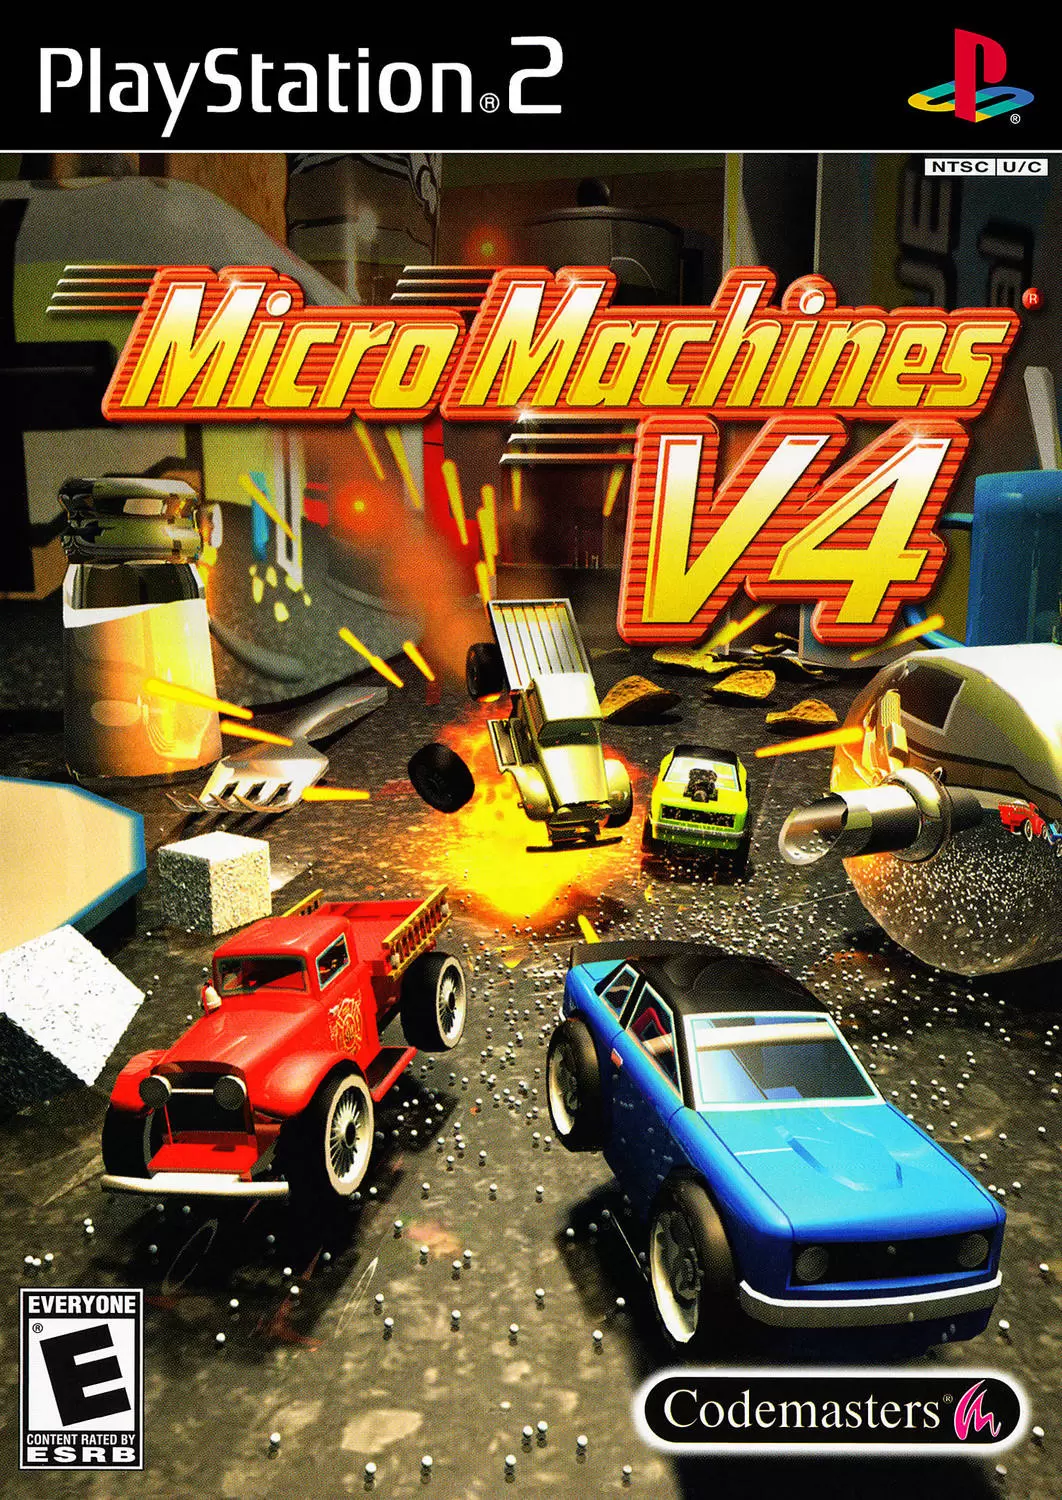 PS2 Games - Micro Machines V4